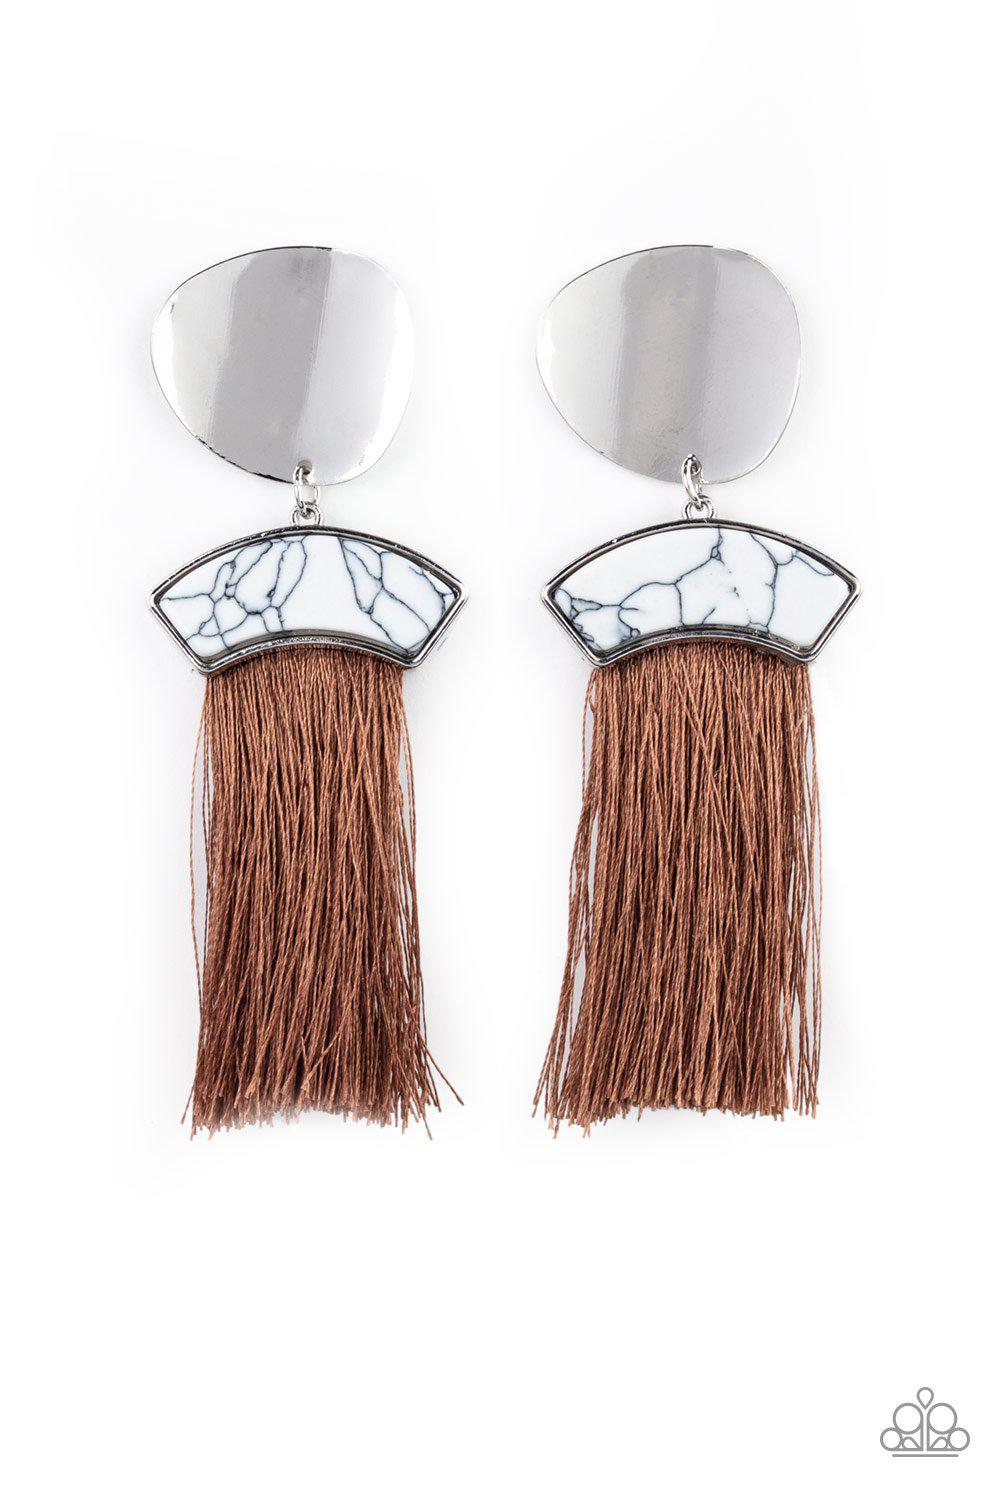 Insta Inca White and Brown Tassel Earrings - Paparazzi Accessories-CarasShop.com - $5 Jewelry by Cara Jewels